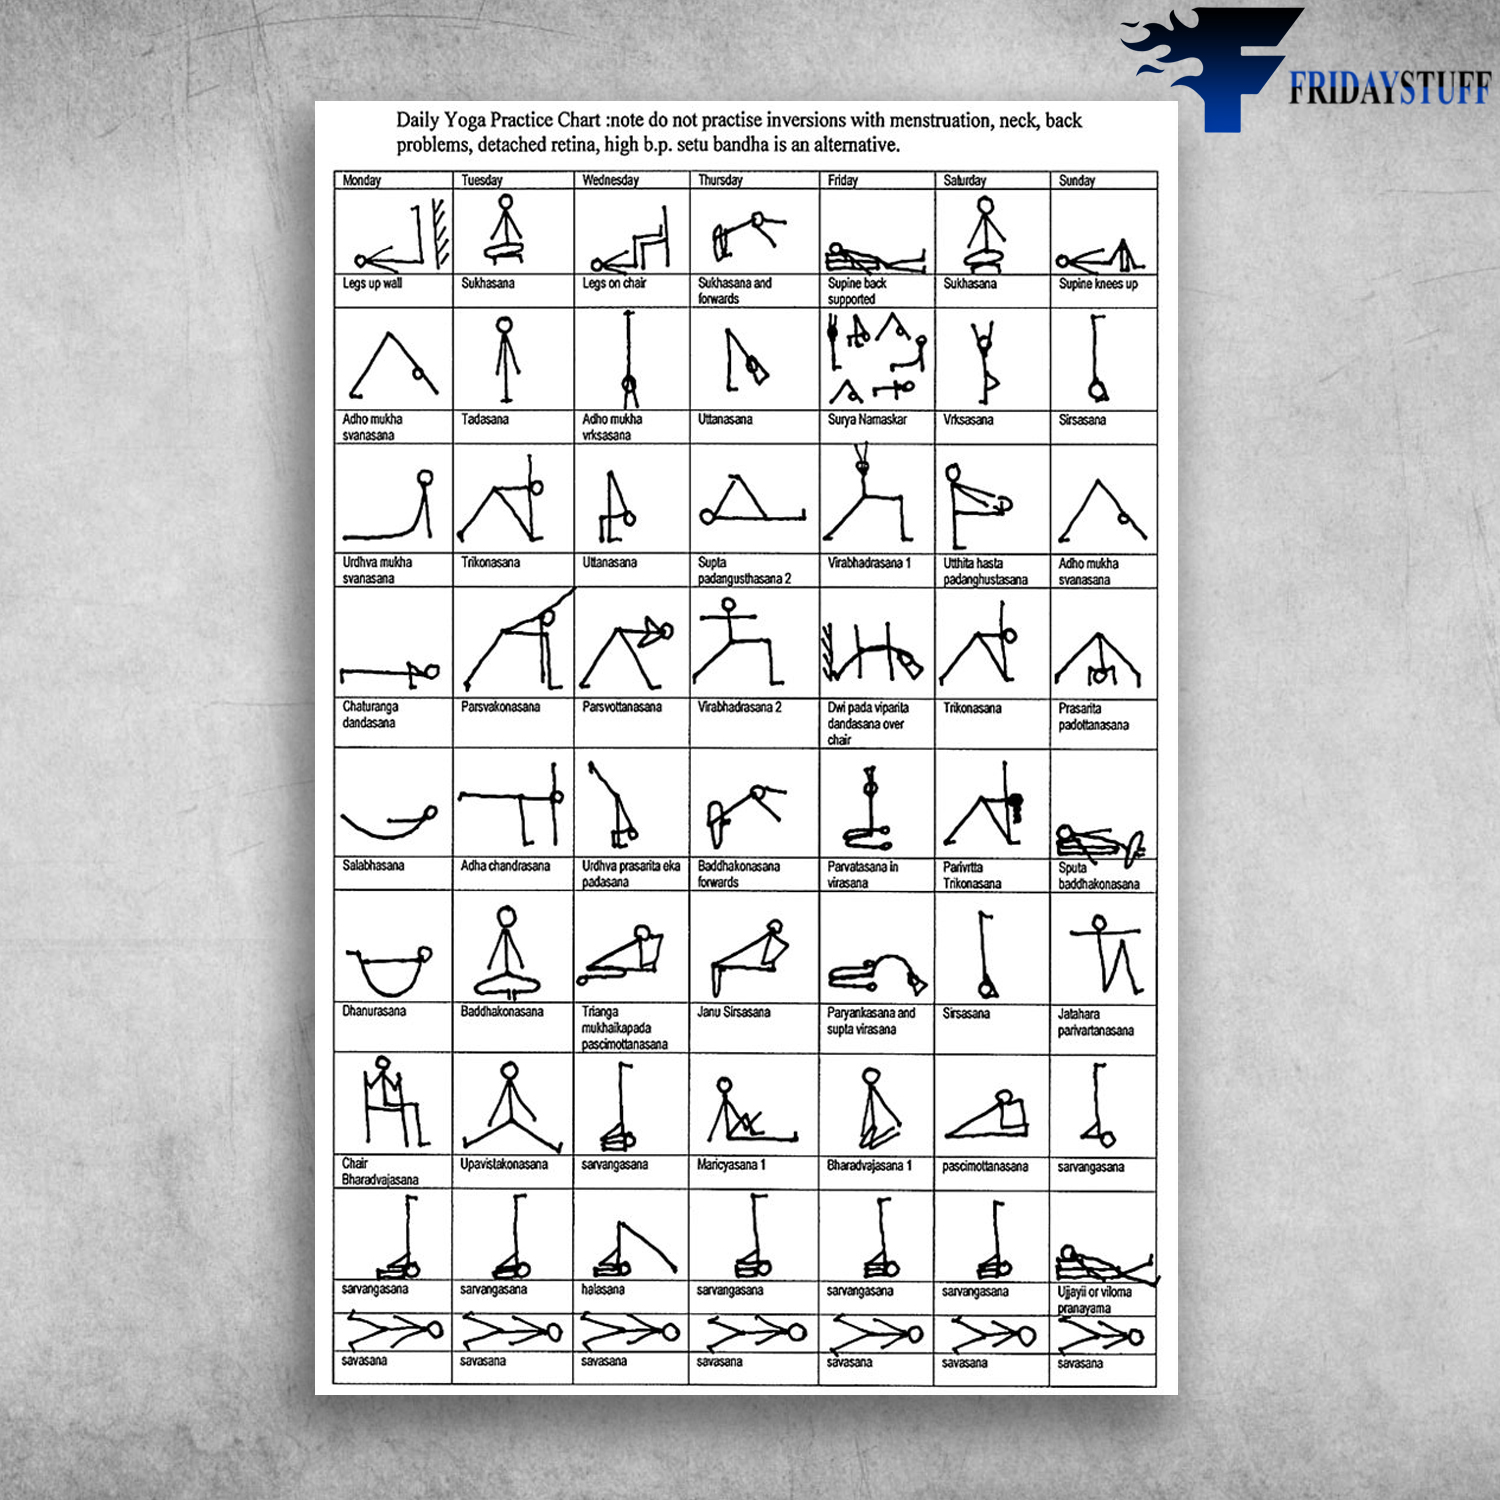 Daily Yoga Practice Chart Note Do Not Practise Inversions